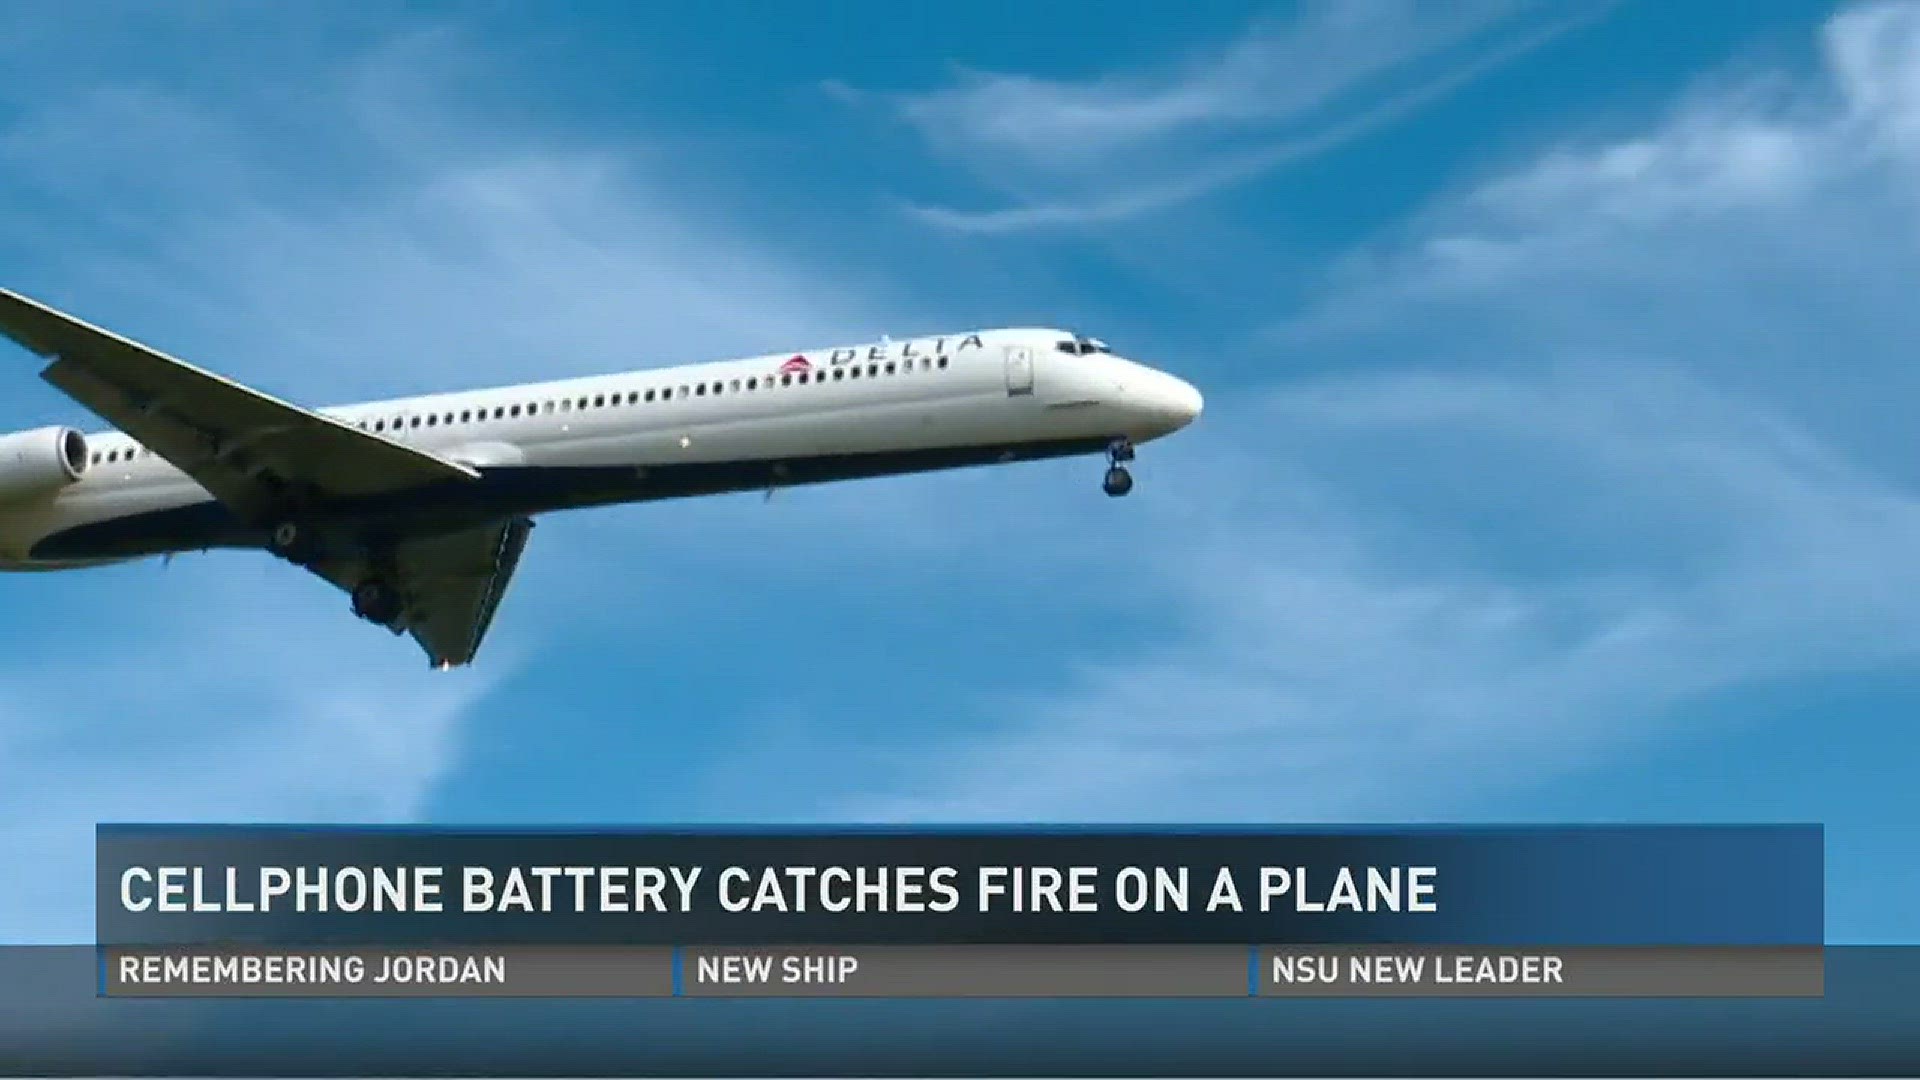 Cellphone battery catches fire on plane